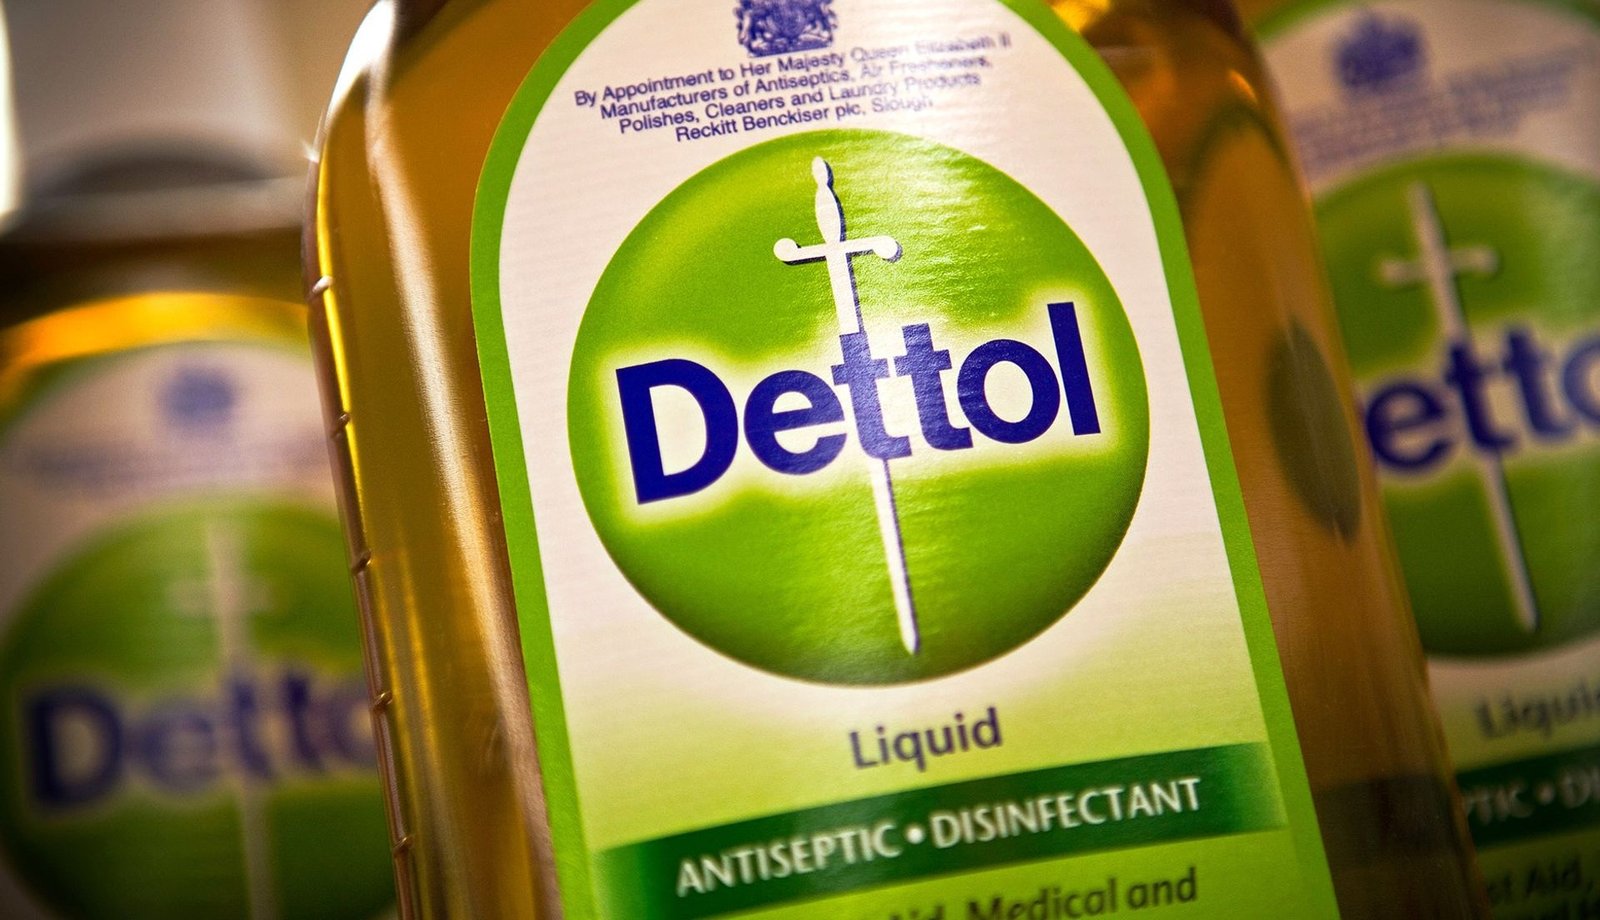 Marketing Strategy of Dettol